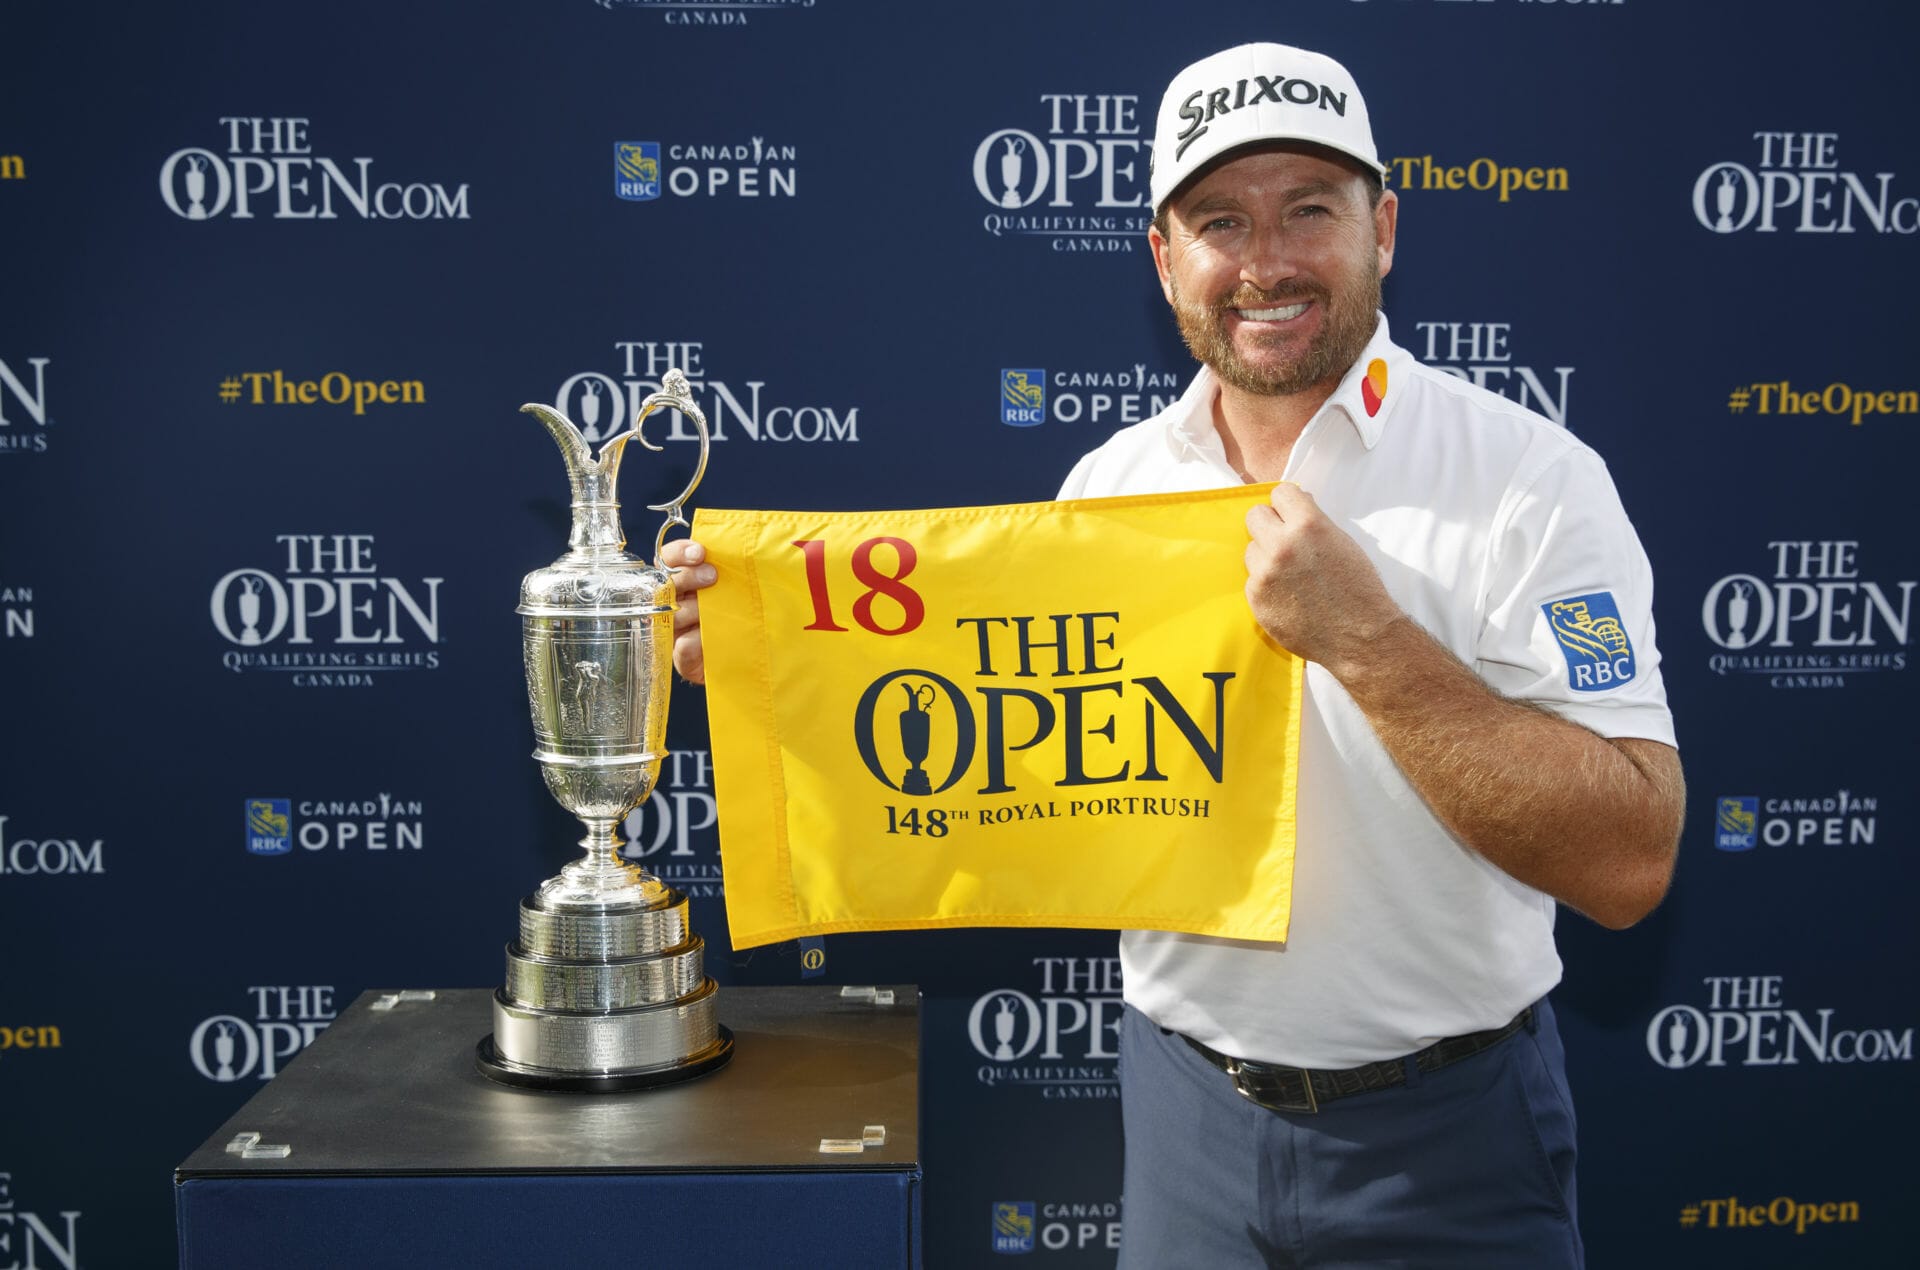 Gmac holes clutch 30-footer to secure Royal Portrush tee-time